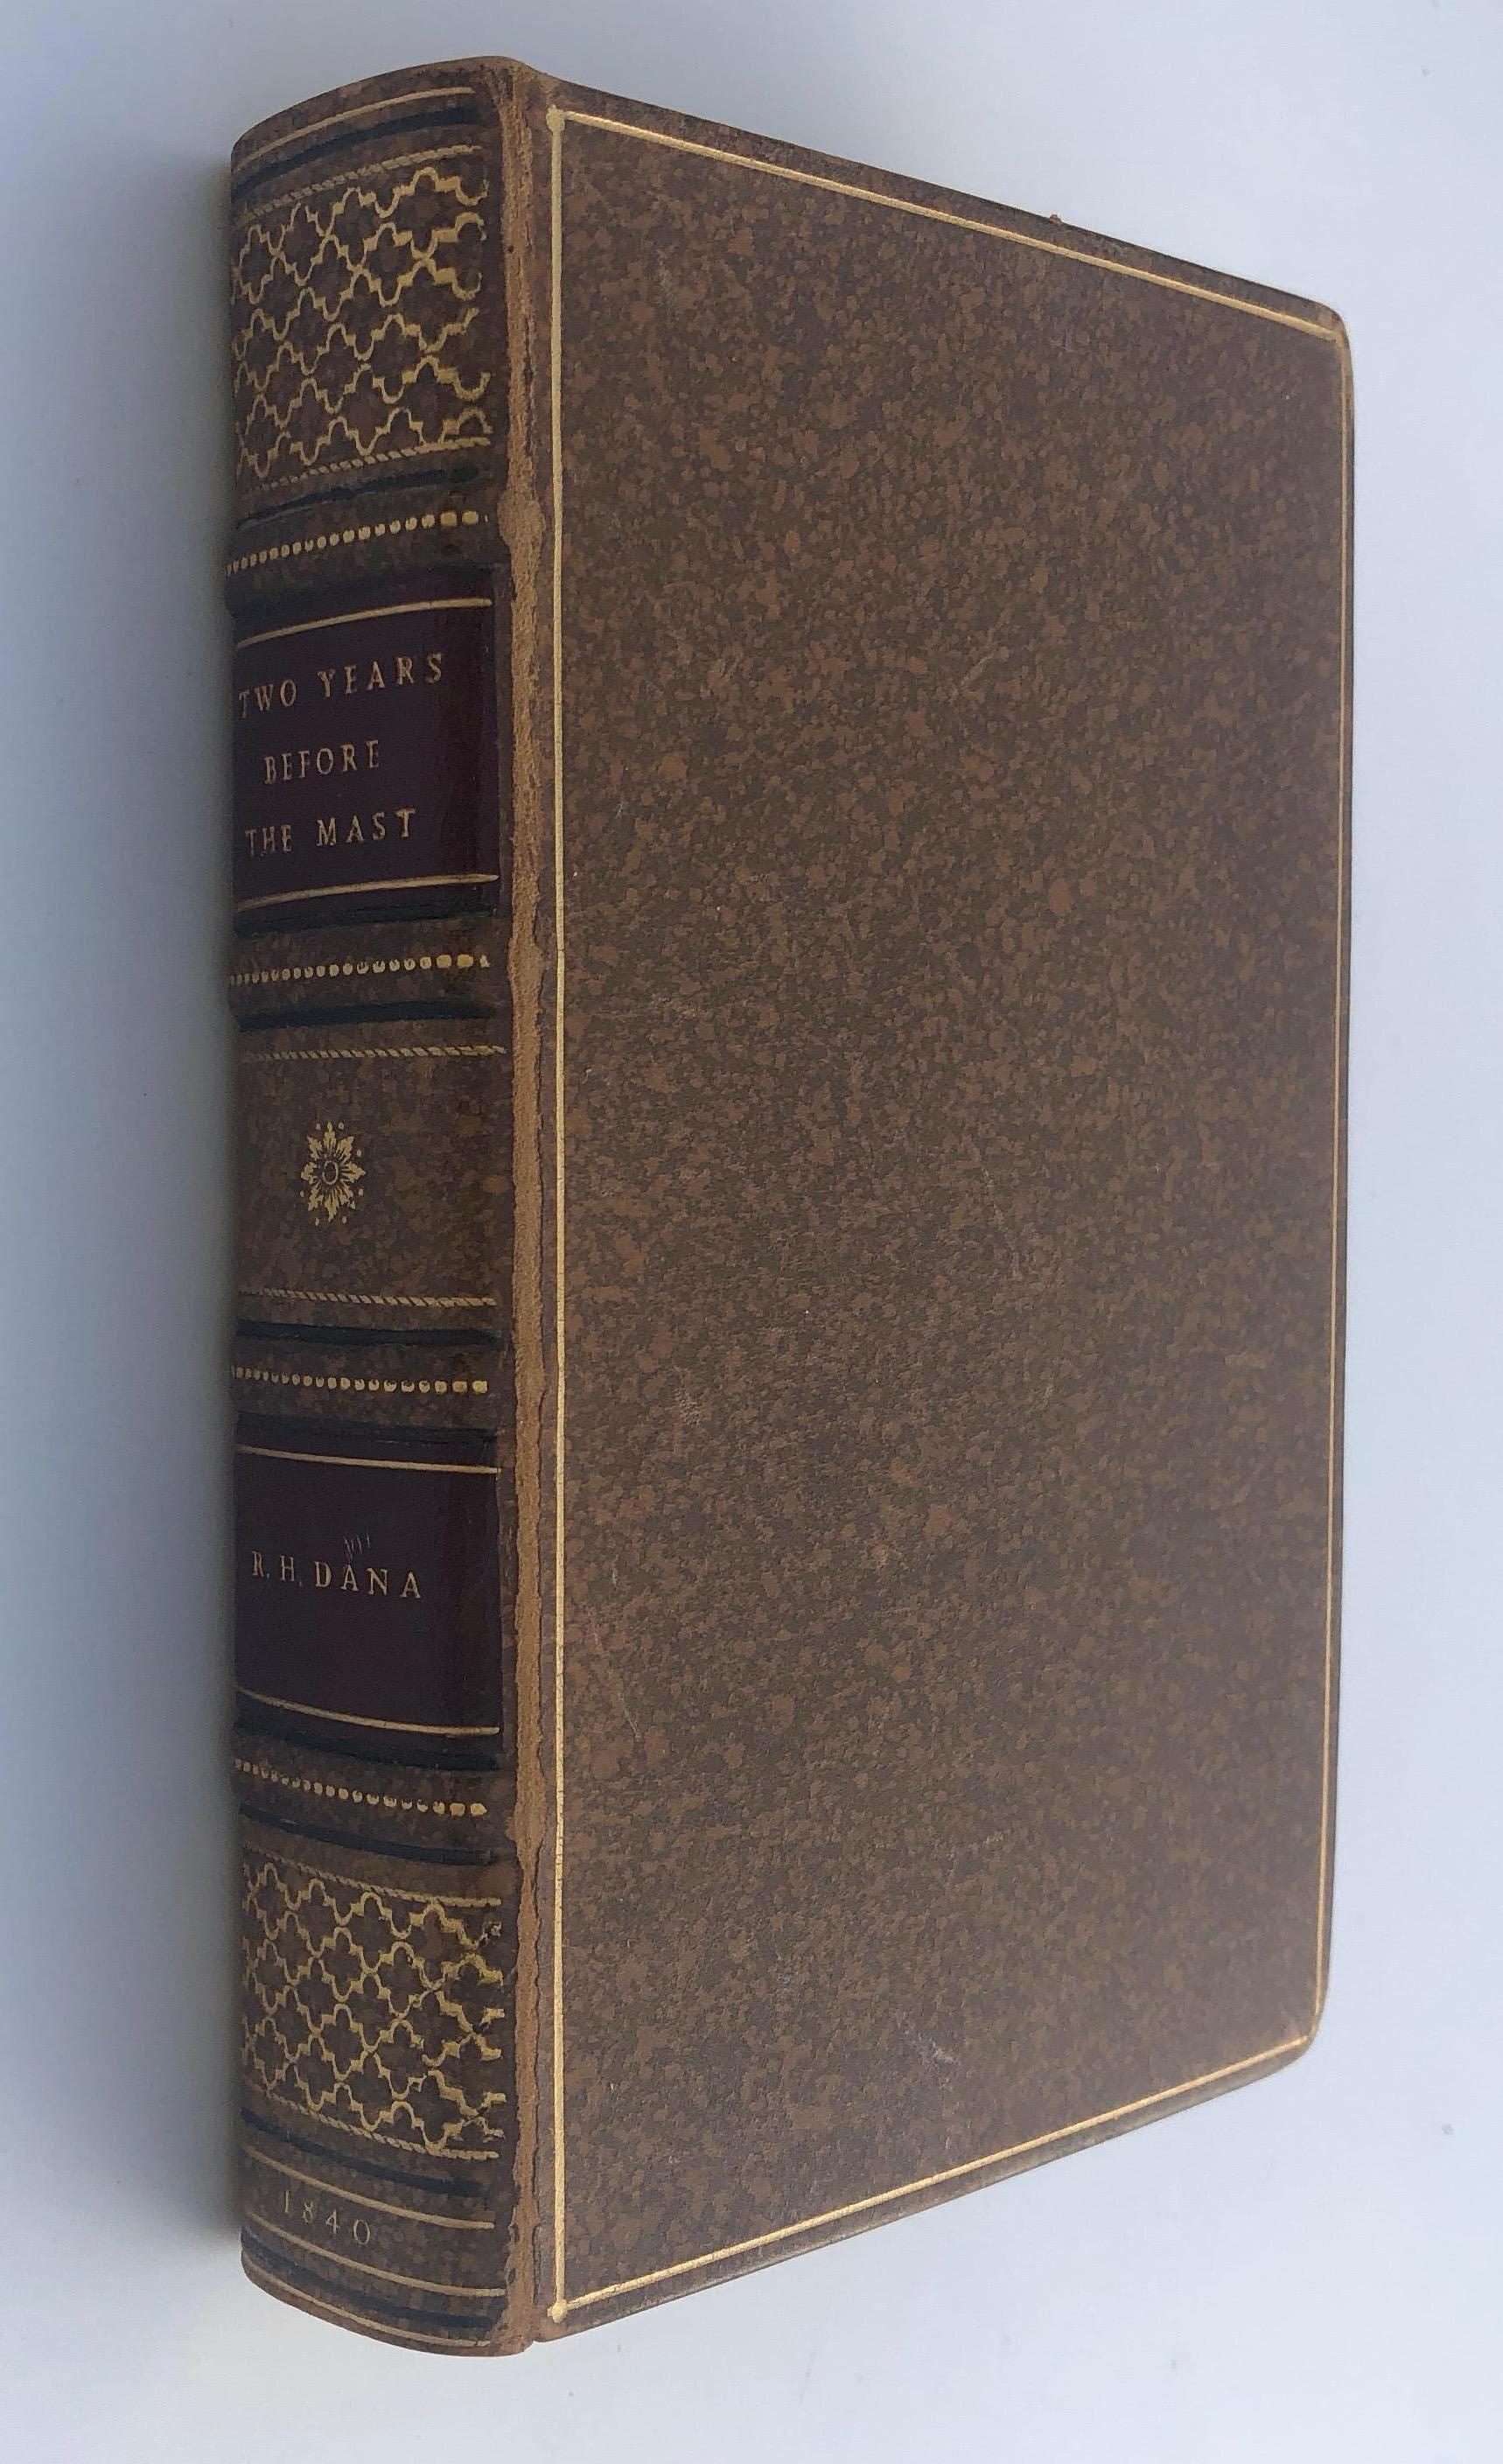 Richard Henry Dana - Two Years Before the Mast. A Personal Narrative of Life at Sea.
First Edition, Harper & Brothers N.Y. 1840.

A very important classic of American literature. The book records Dana's visit aboard the brig The Pilgrim to